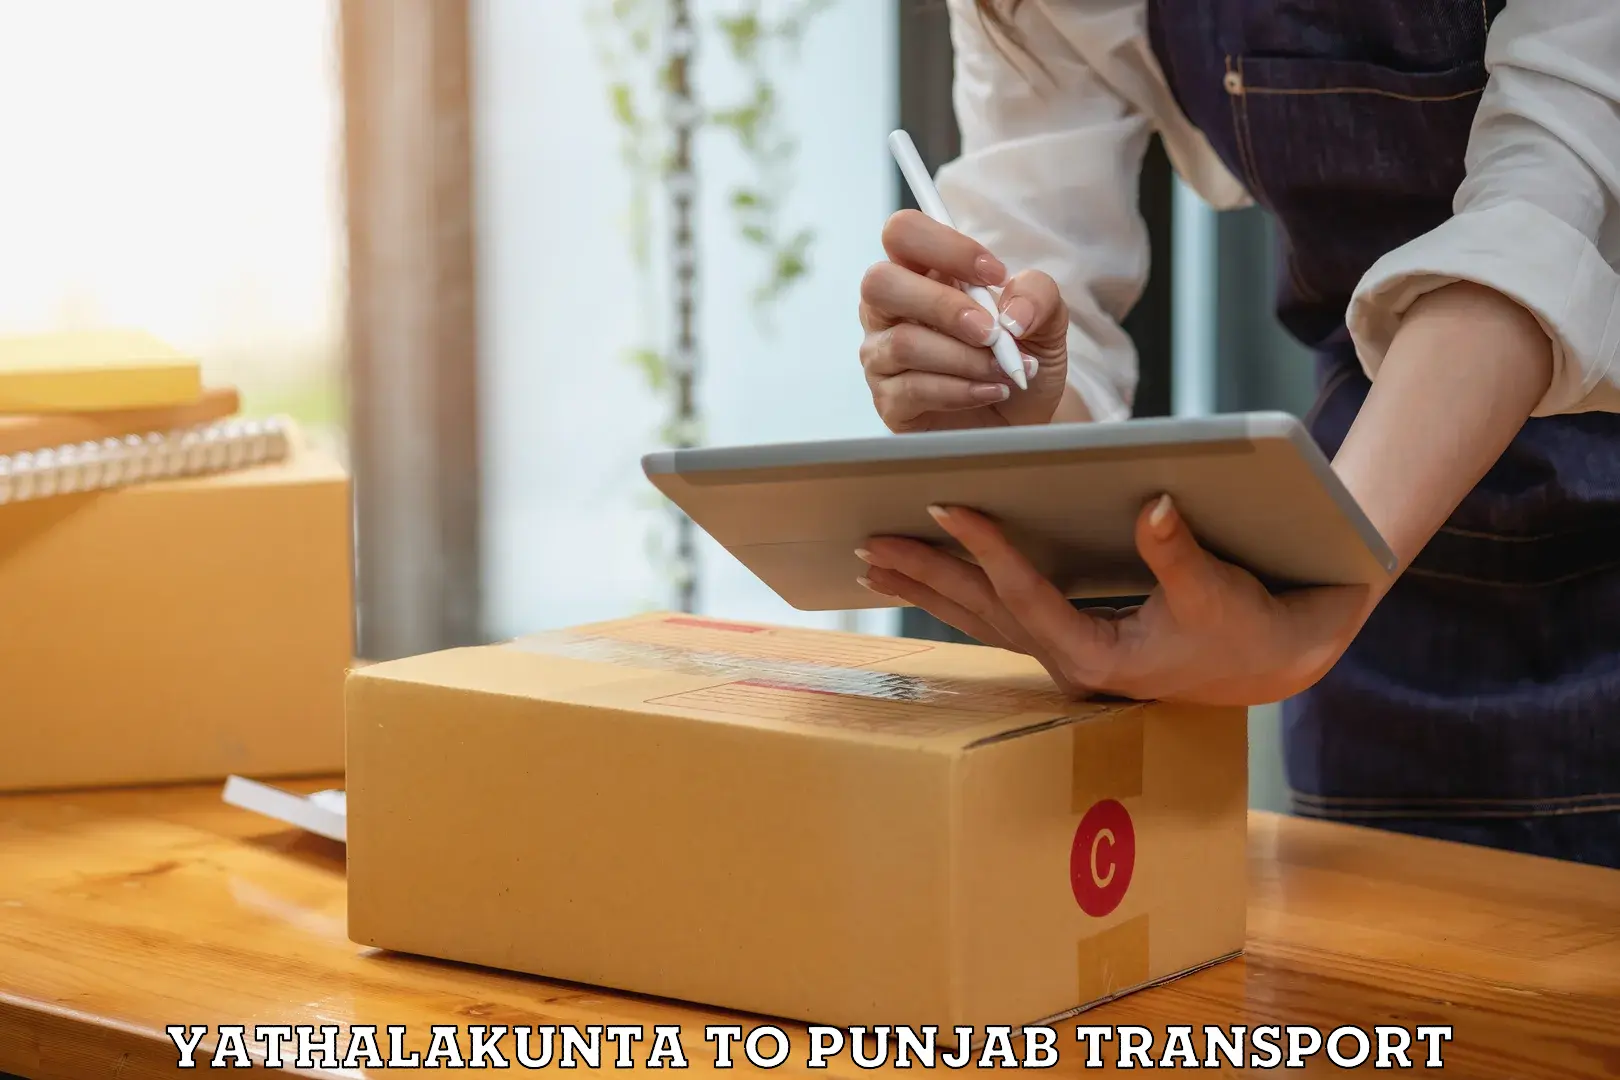 Delivery service Yathalakunta to Mansa